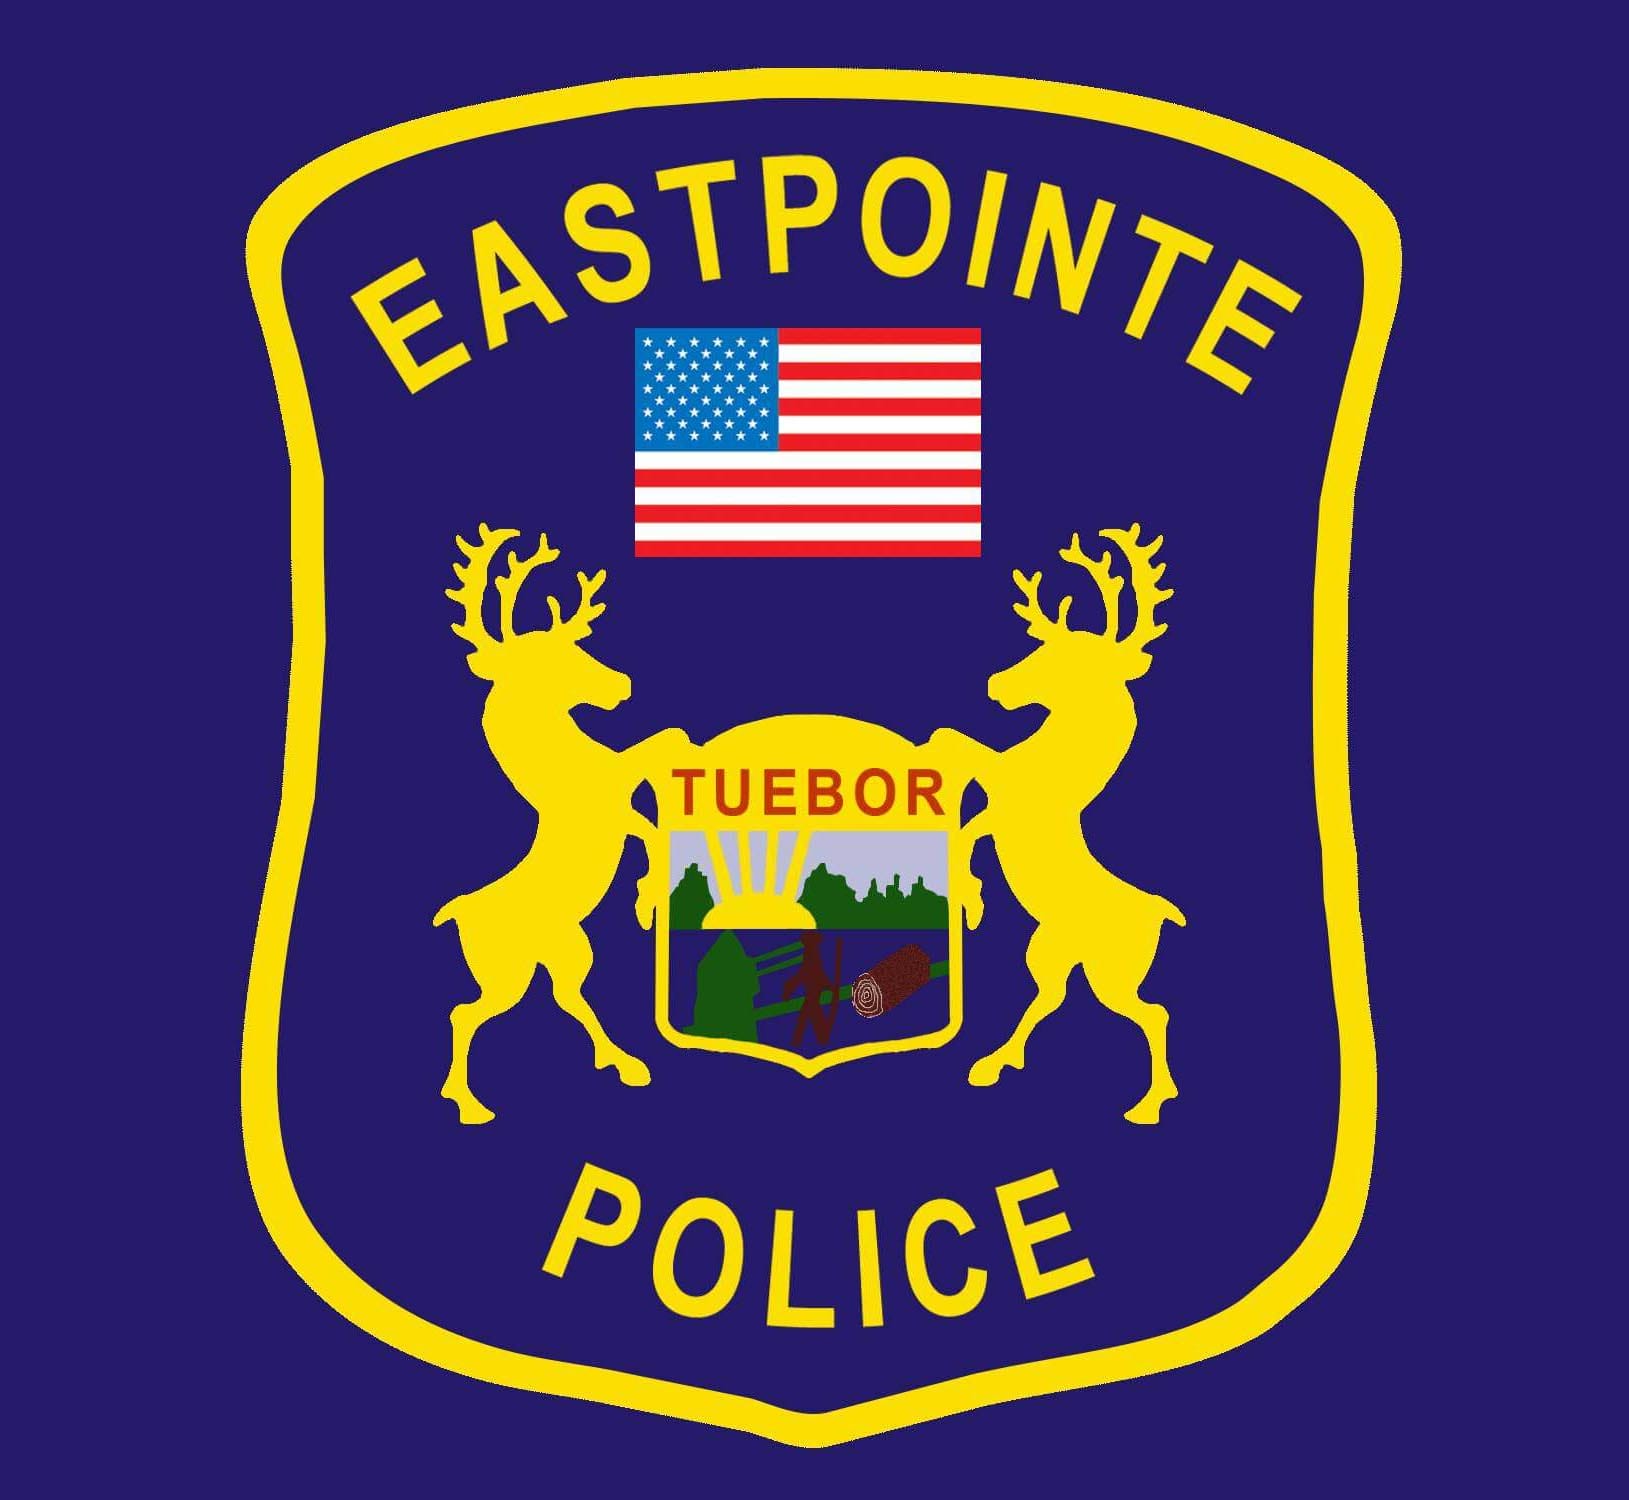 Eastpointe Police Officer Full-time Position Available | Eastpointe PD logo